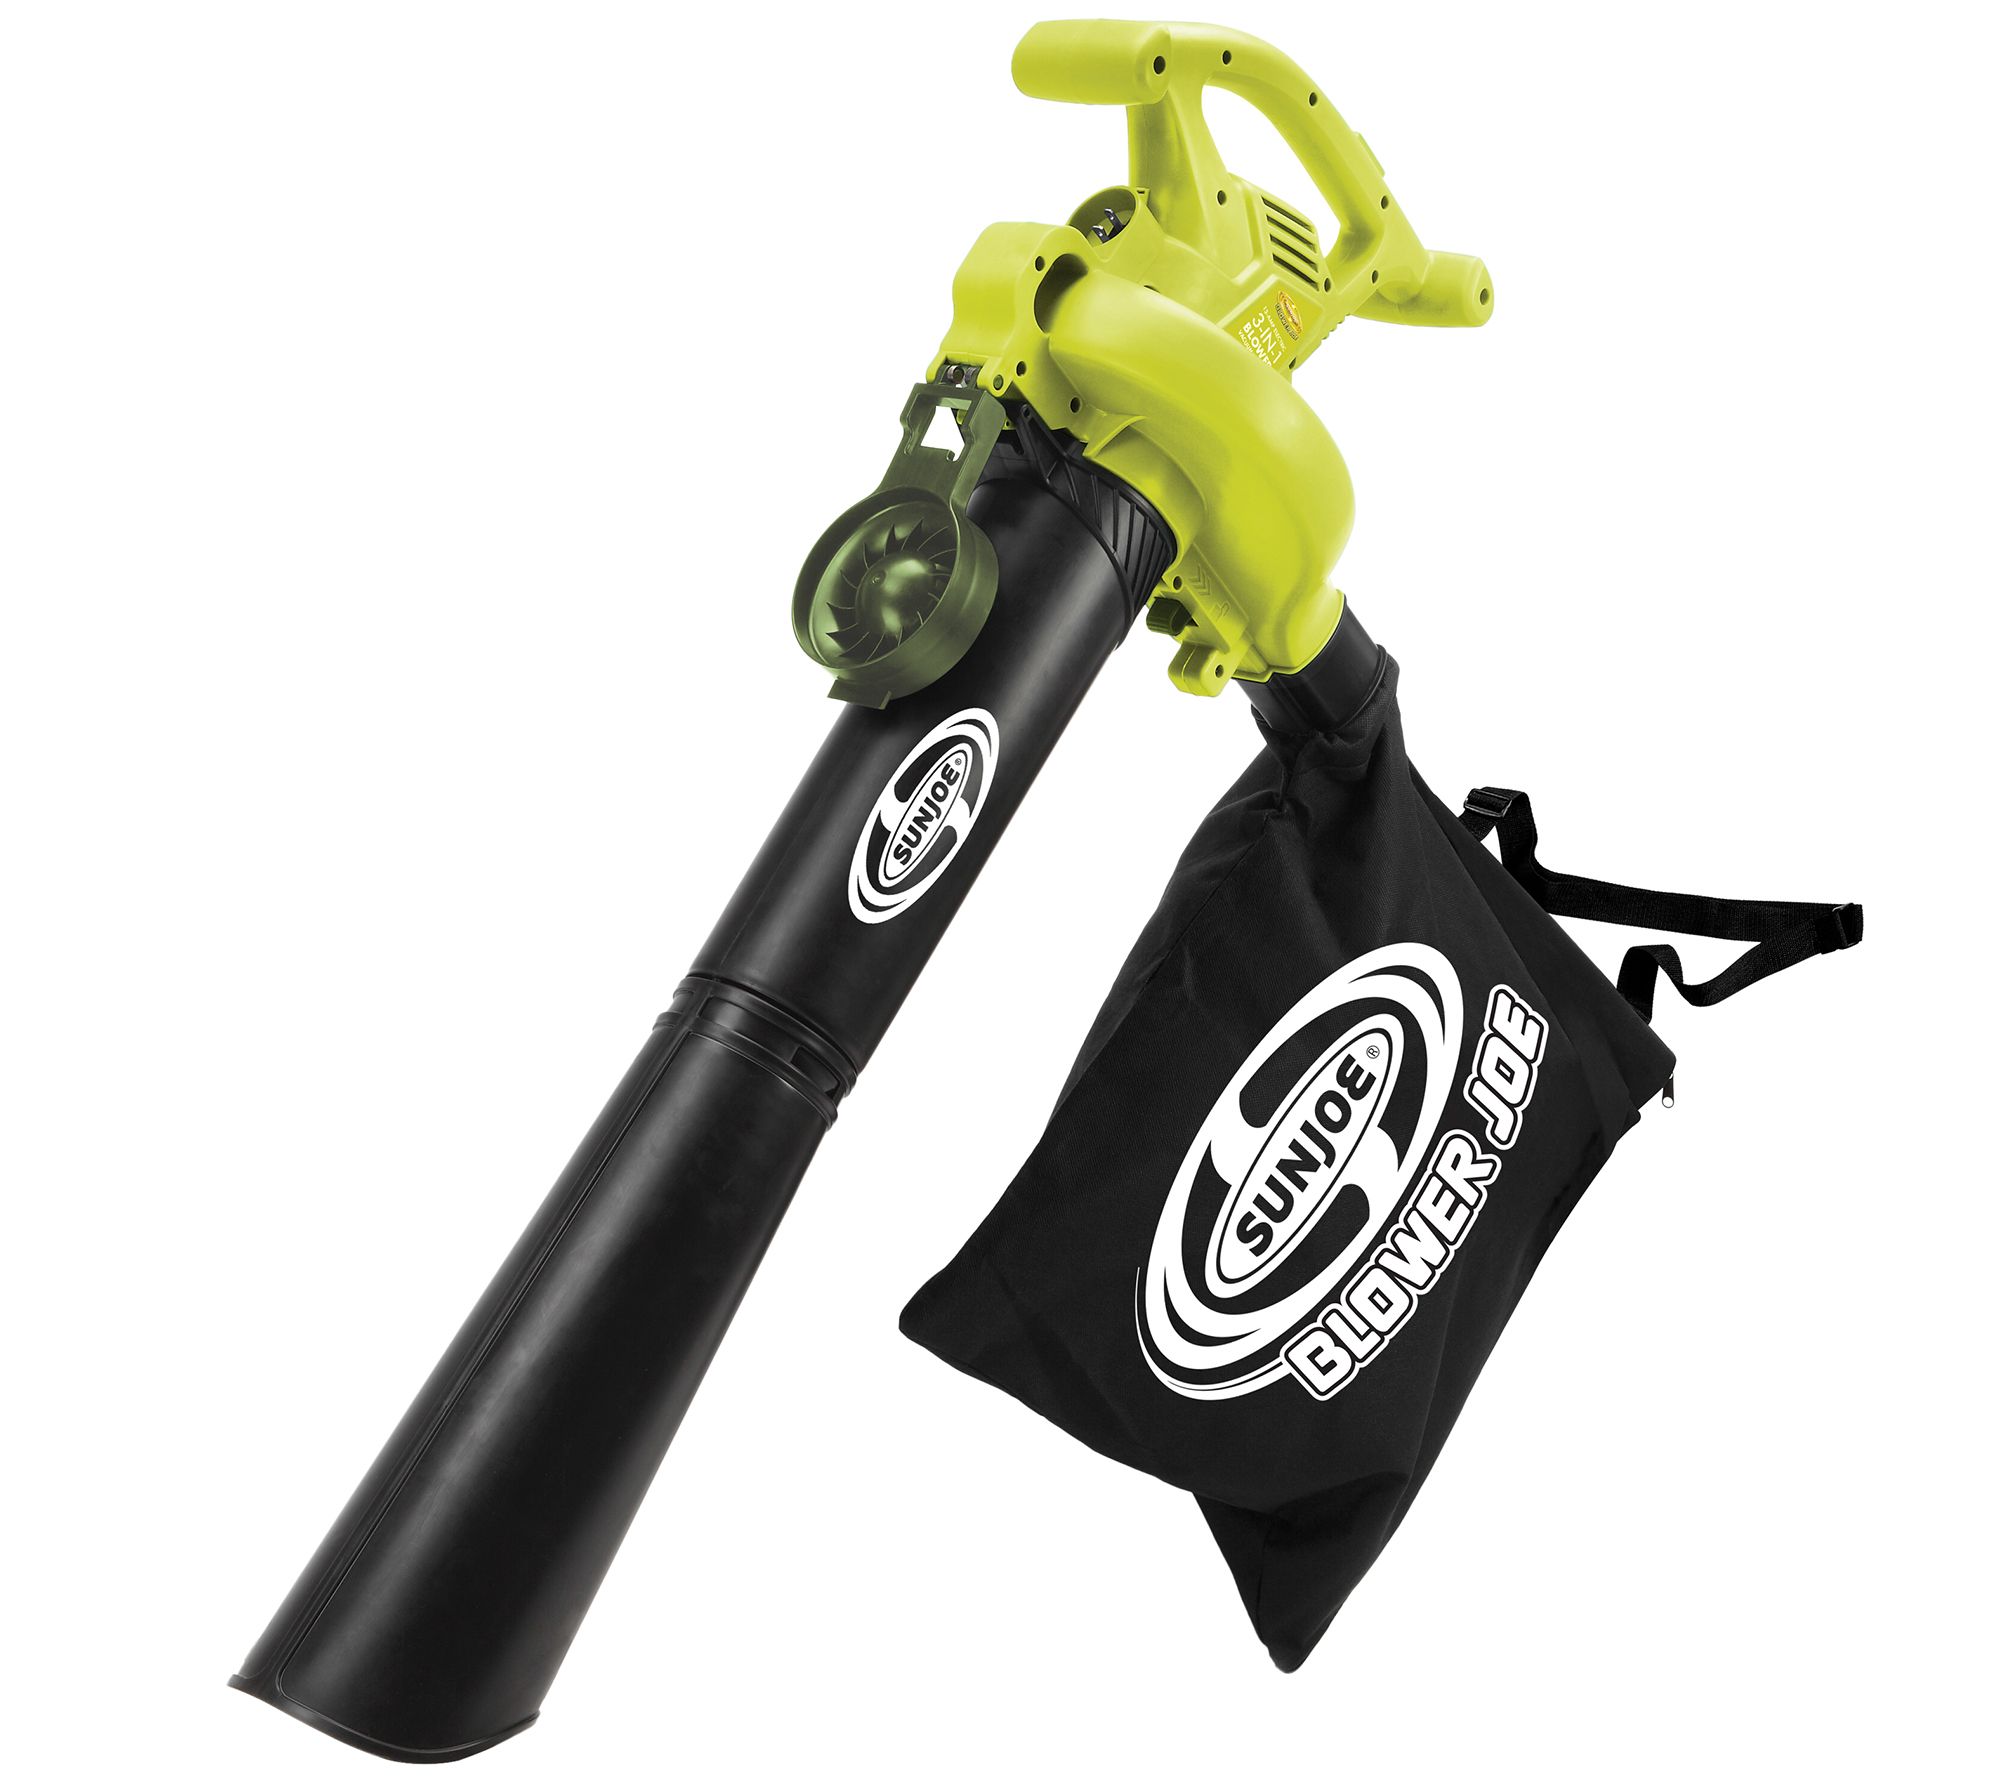 3-in-1 electric blower